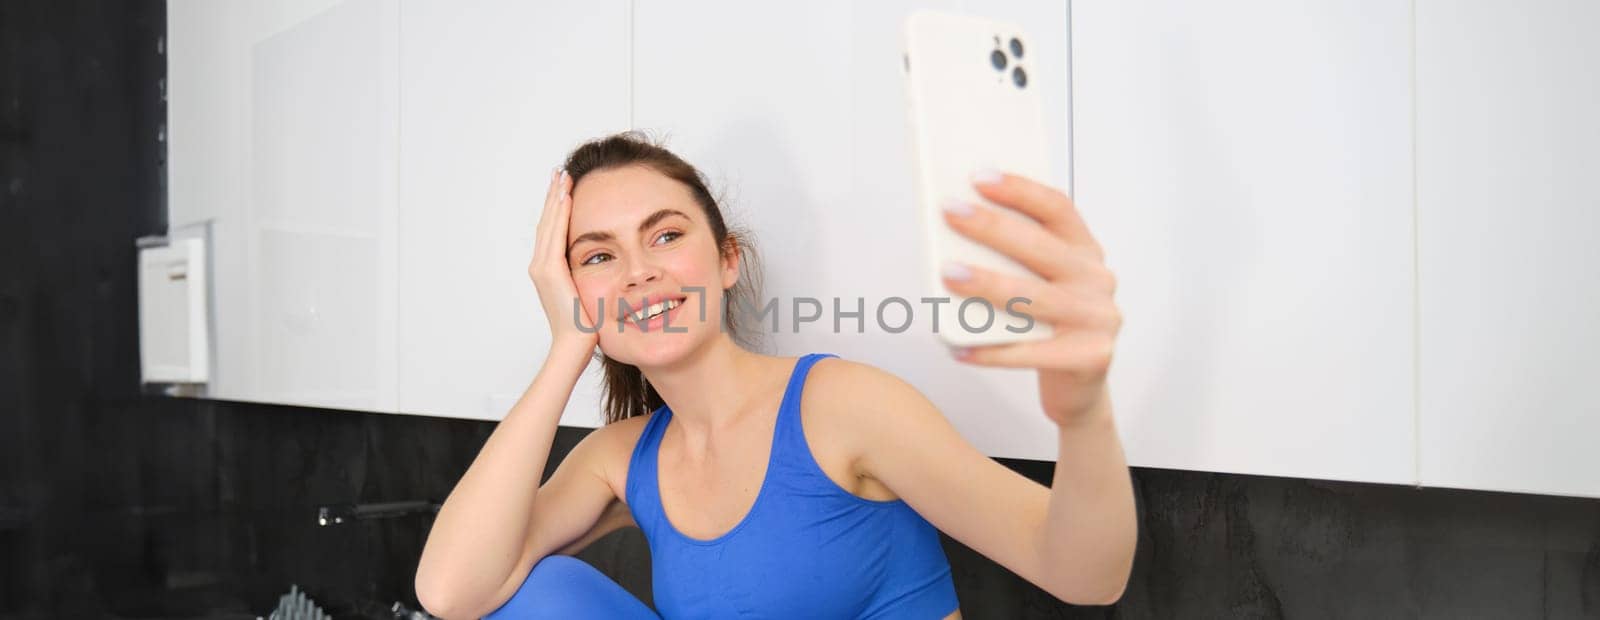 Image of fit and healthy, smiling fitness girl, posing for selfie on mobile phone, holding smartphone, looking at screen, taking photos in sportsbra and leggings.